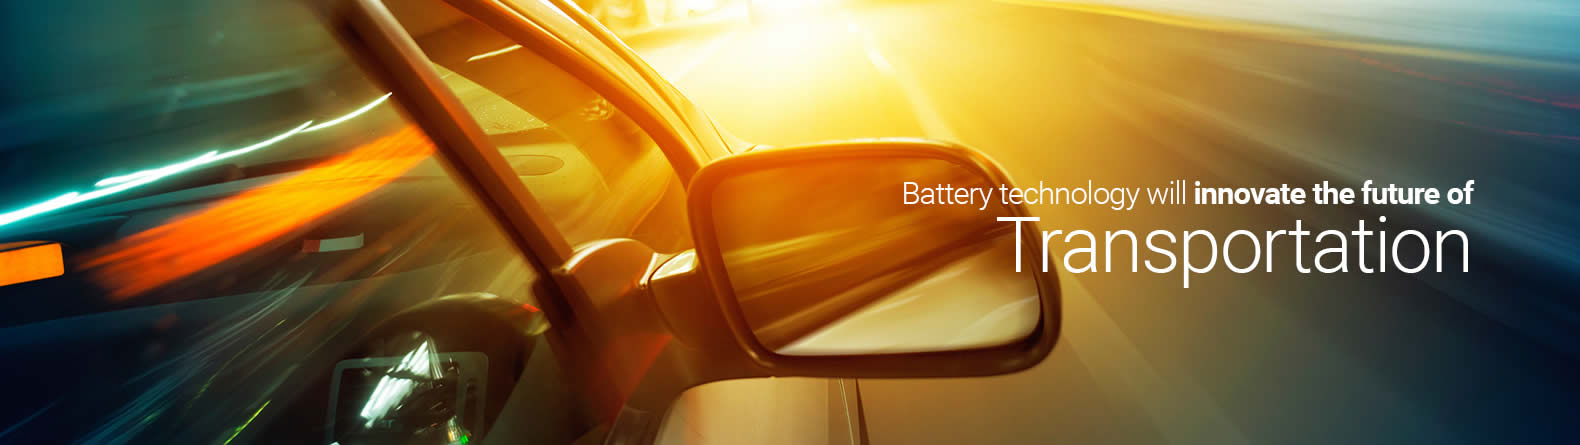 Battery technology will innovate the future of Transportation